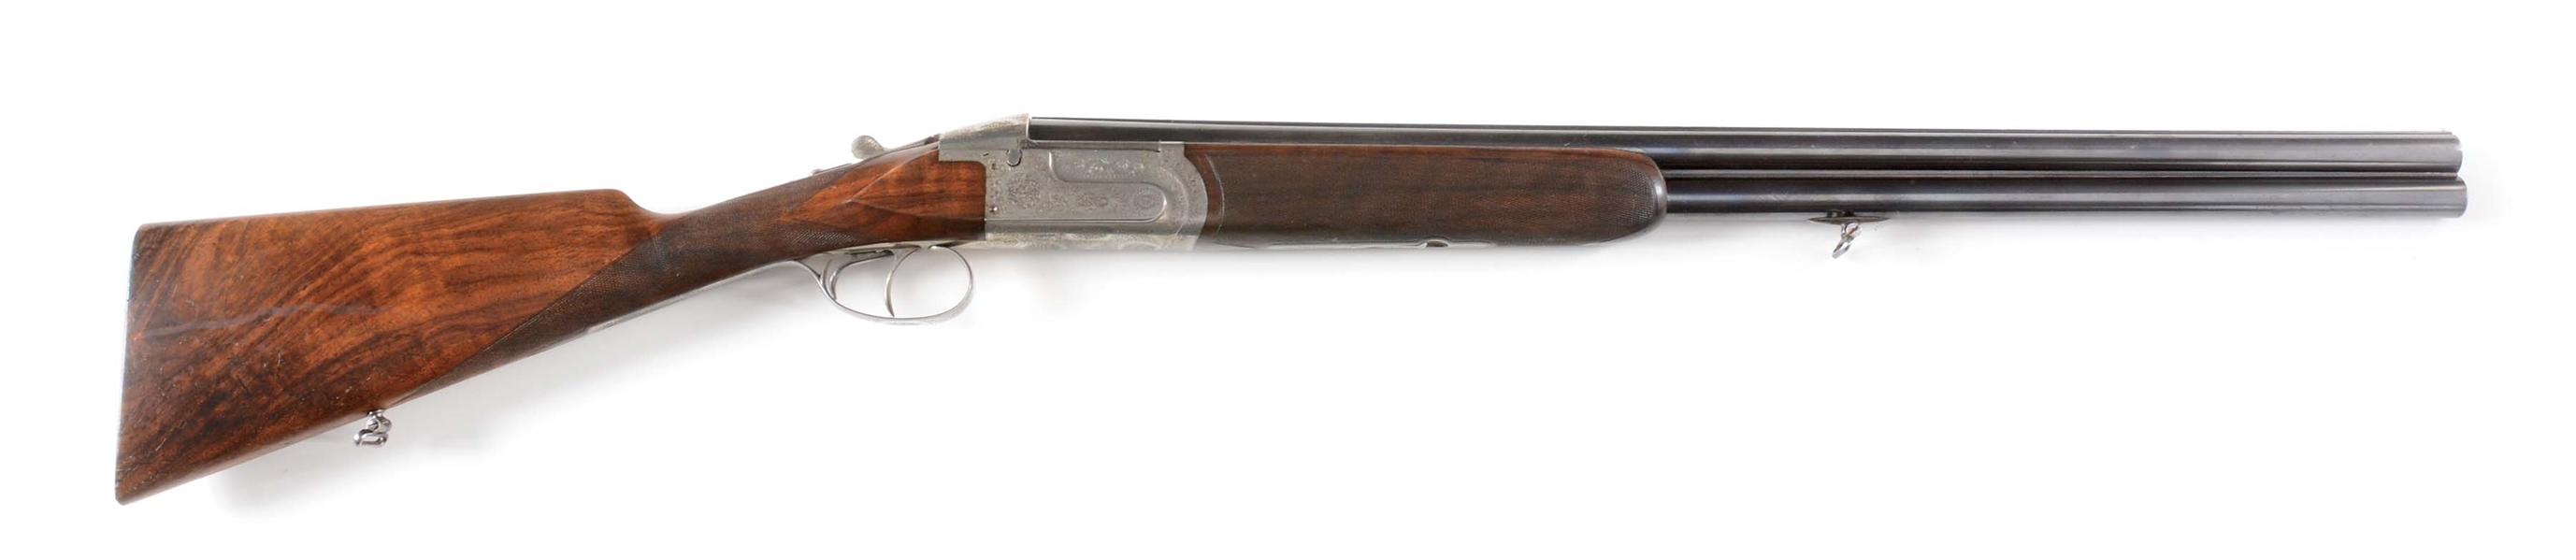 (M) VERY HIGH QUALITY FRENCH OVER-UNDER 12 BORE SHOTGUN.